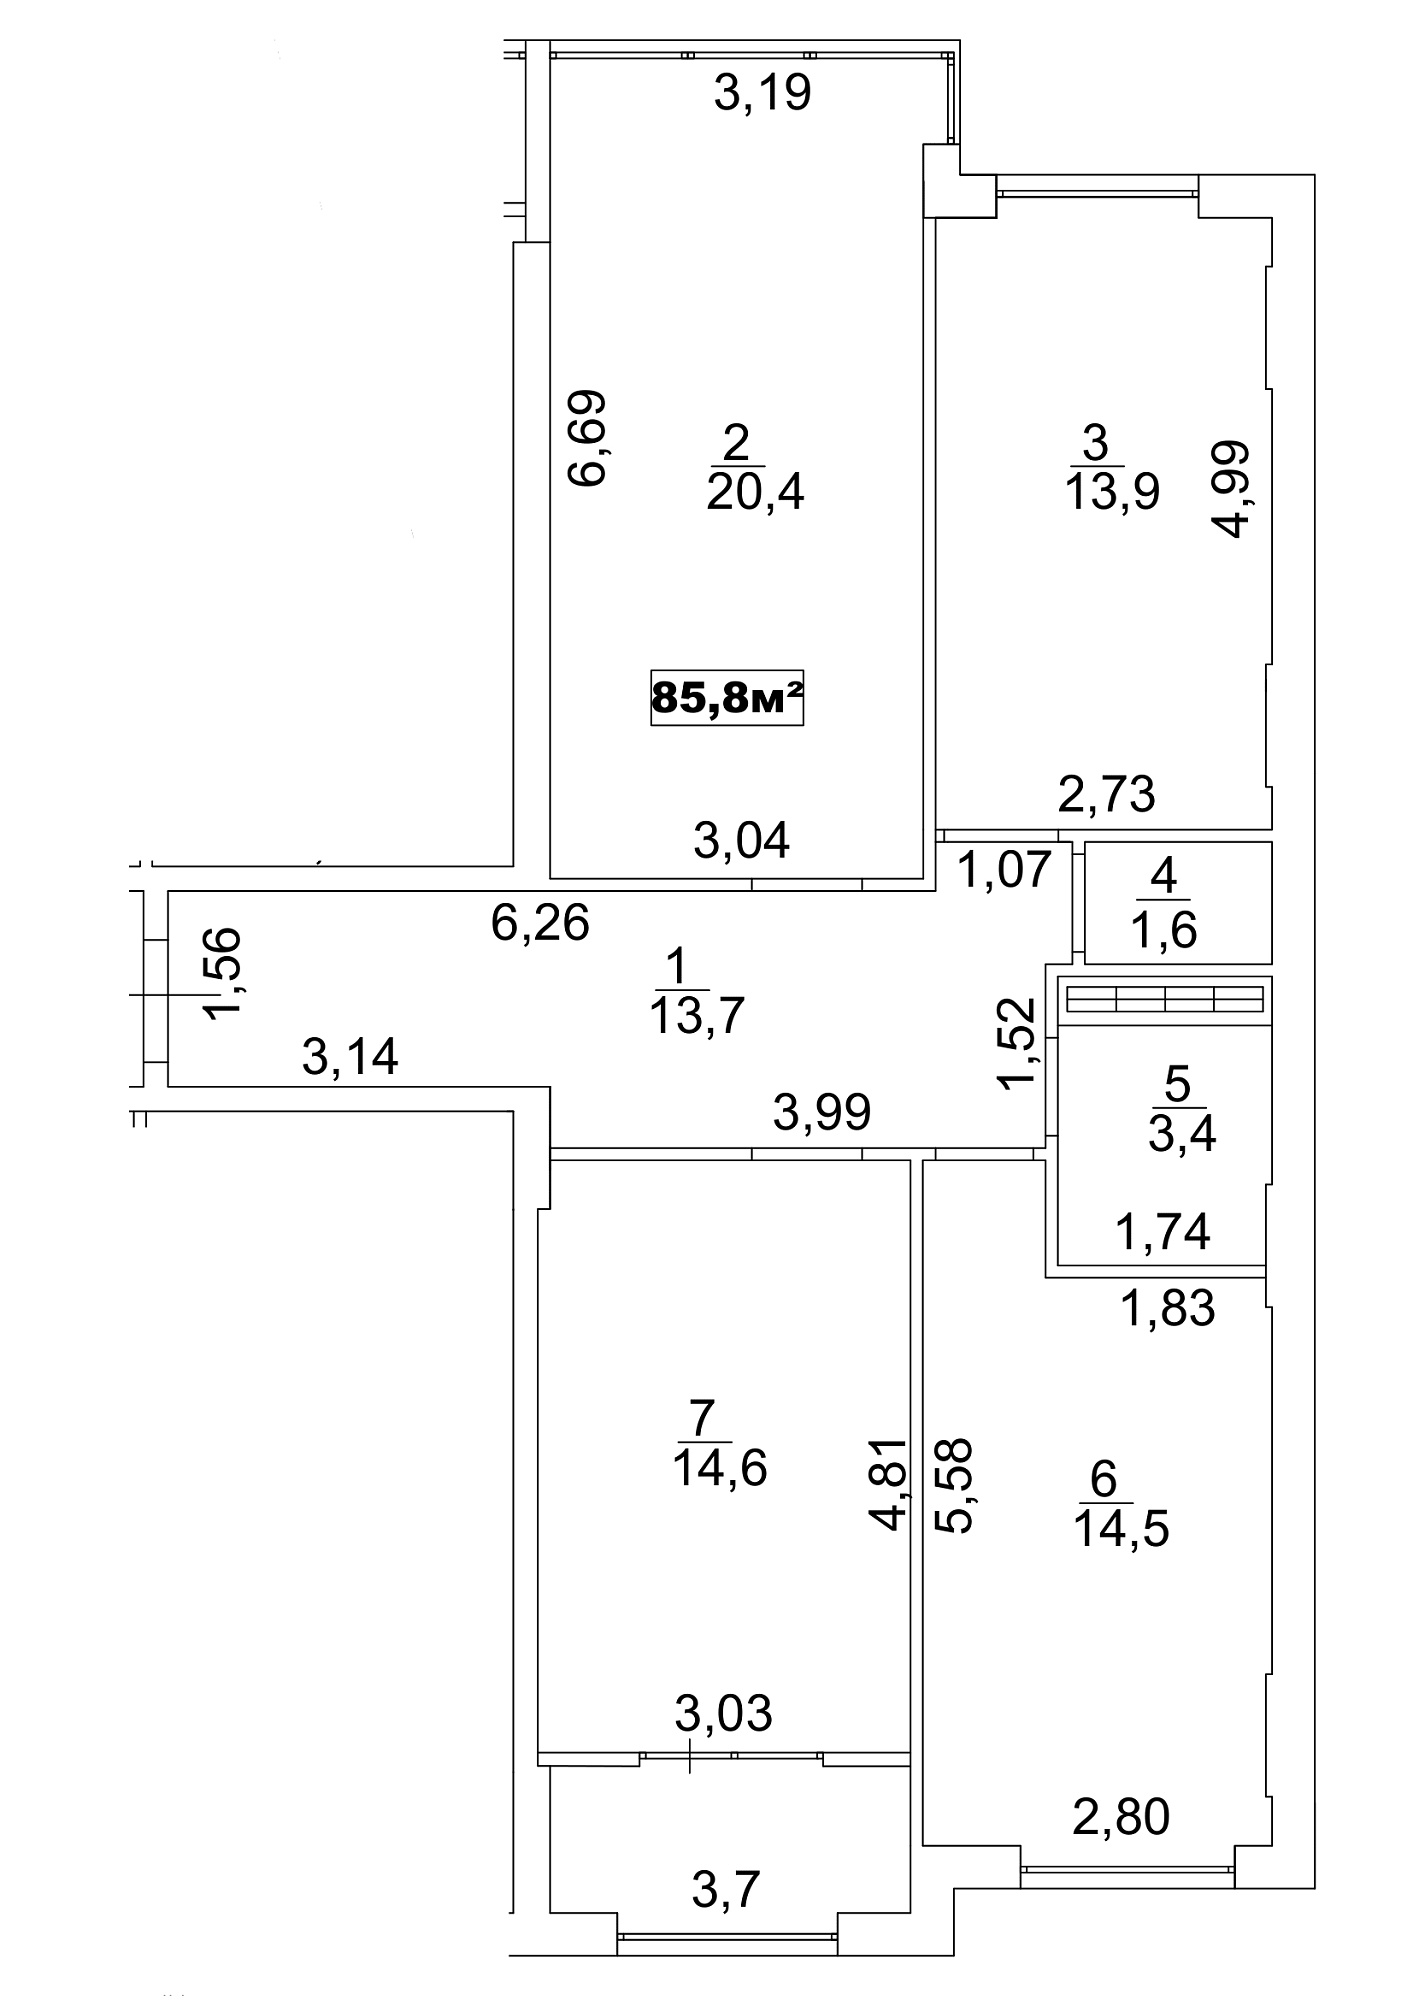 Planning 3-rm flats area 85.8m2, AB-13-10/00085.